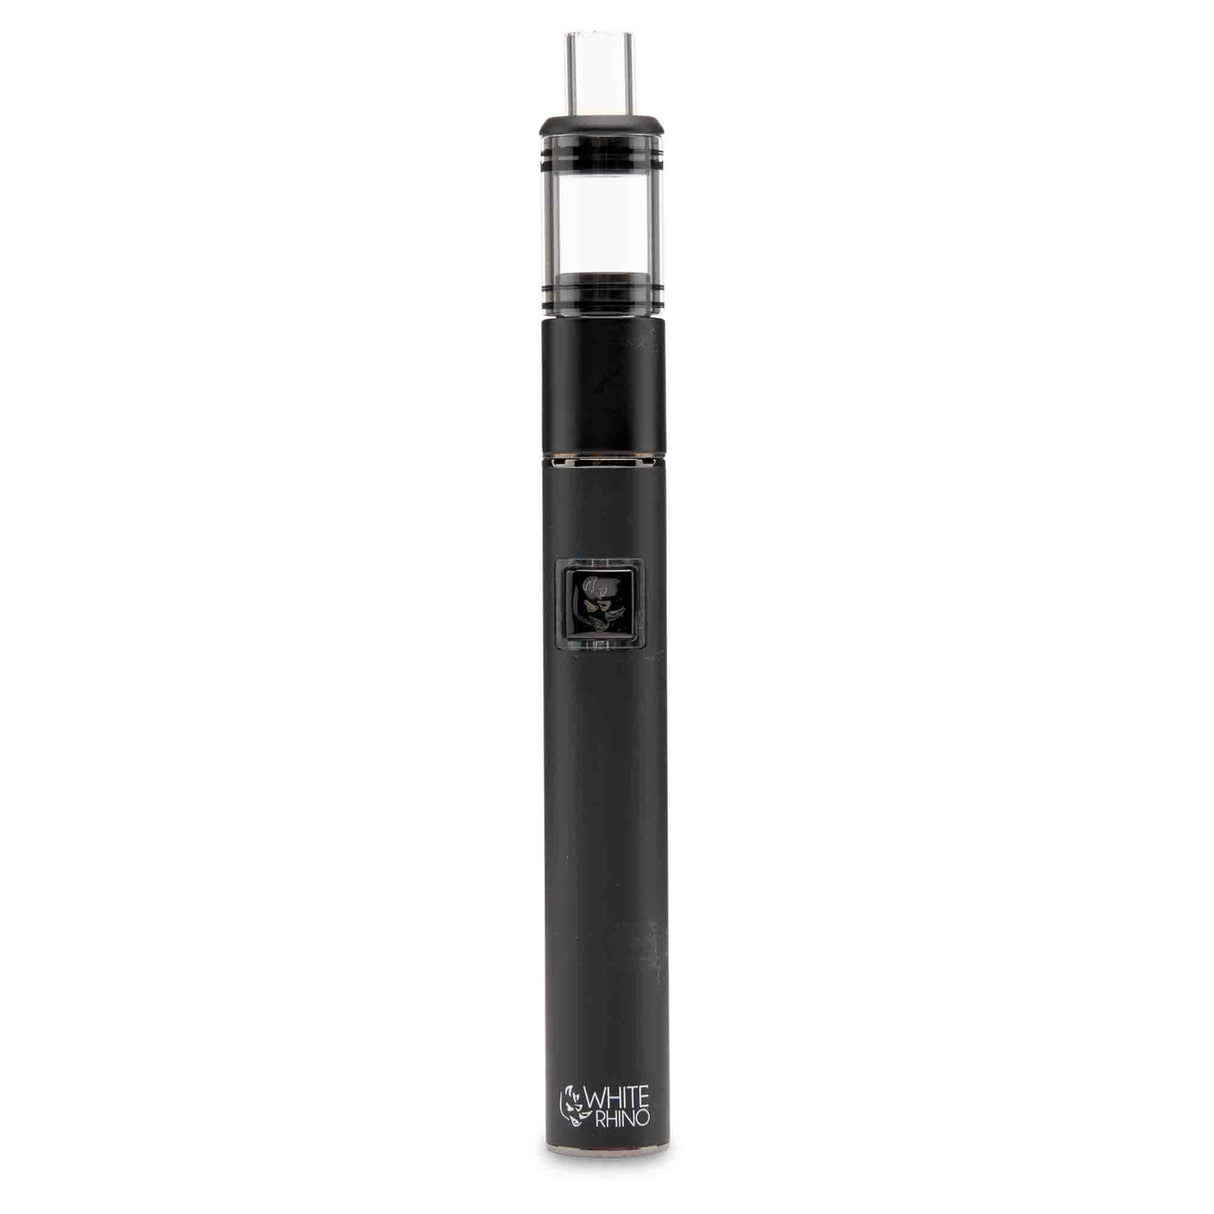 White Rhino Xtract concentrate vaporizer